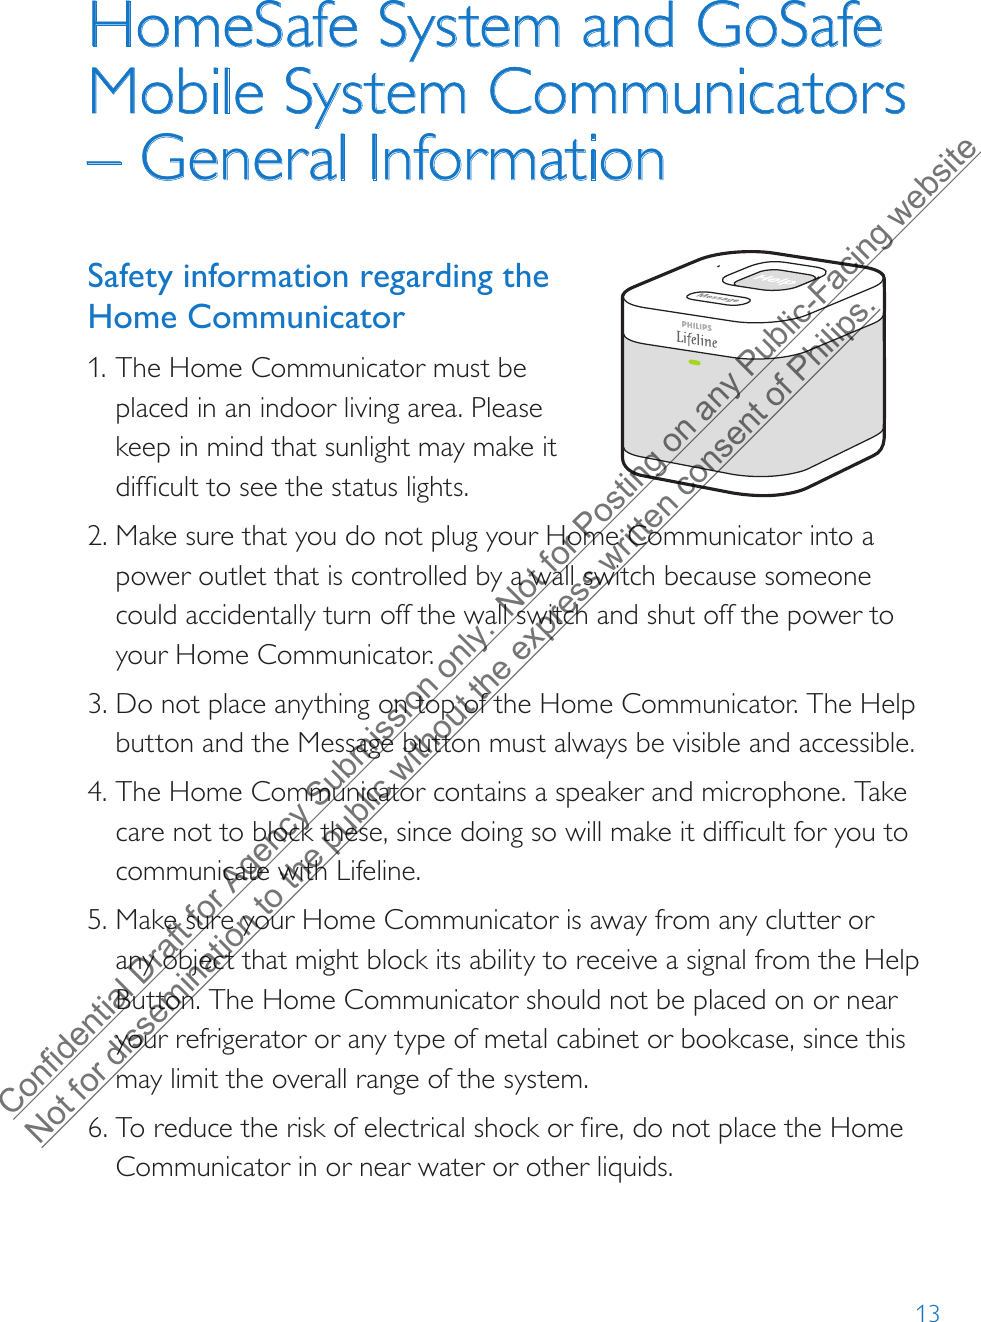 13HomeSafe System and GoSafe Mobile System Communicators – General InformationSafety information regarding the Home Communicator1. The Home Communicator must beplaced in an indoor living area. Pleasekeep in mind that sunlight may make itdifficult to see the status lights.2. Make sure that you do not plug your Home Communicator into a power outlet that is controlled by a wall switch because someone could accidentally turn off the wall switch and shut off the power to your Home Communicator. 3. Do not place anything on top of the Home Communicator. The Help button and the Message button must always be visible and accessible.4. The Home Communicator contains a speaker and microphone. Take care not to block these, since doing so will make it difficult for you to communicate with Lifeline.5. Make sure your Home Communicator is away from any clutter or any object that might block its ability to receive a signal from the Help Button. The Home Communicator should not be placed on or near your refrigerator or any type of metal cabinet or bookcase, since this may limit the overall range of the system.6. To reduce the risk of electrical shock or fire, do not place the HomeCommunicator in or near water or other liquids.Confidential Draft for Agency Submission only.  Not for Posting on any Public-Facing website Not for dissemination to the public without the express written consent of Philips.  